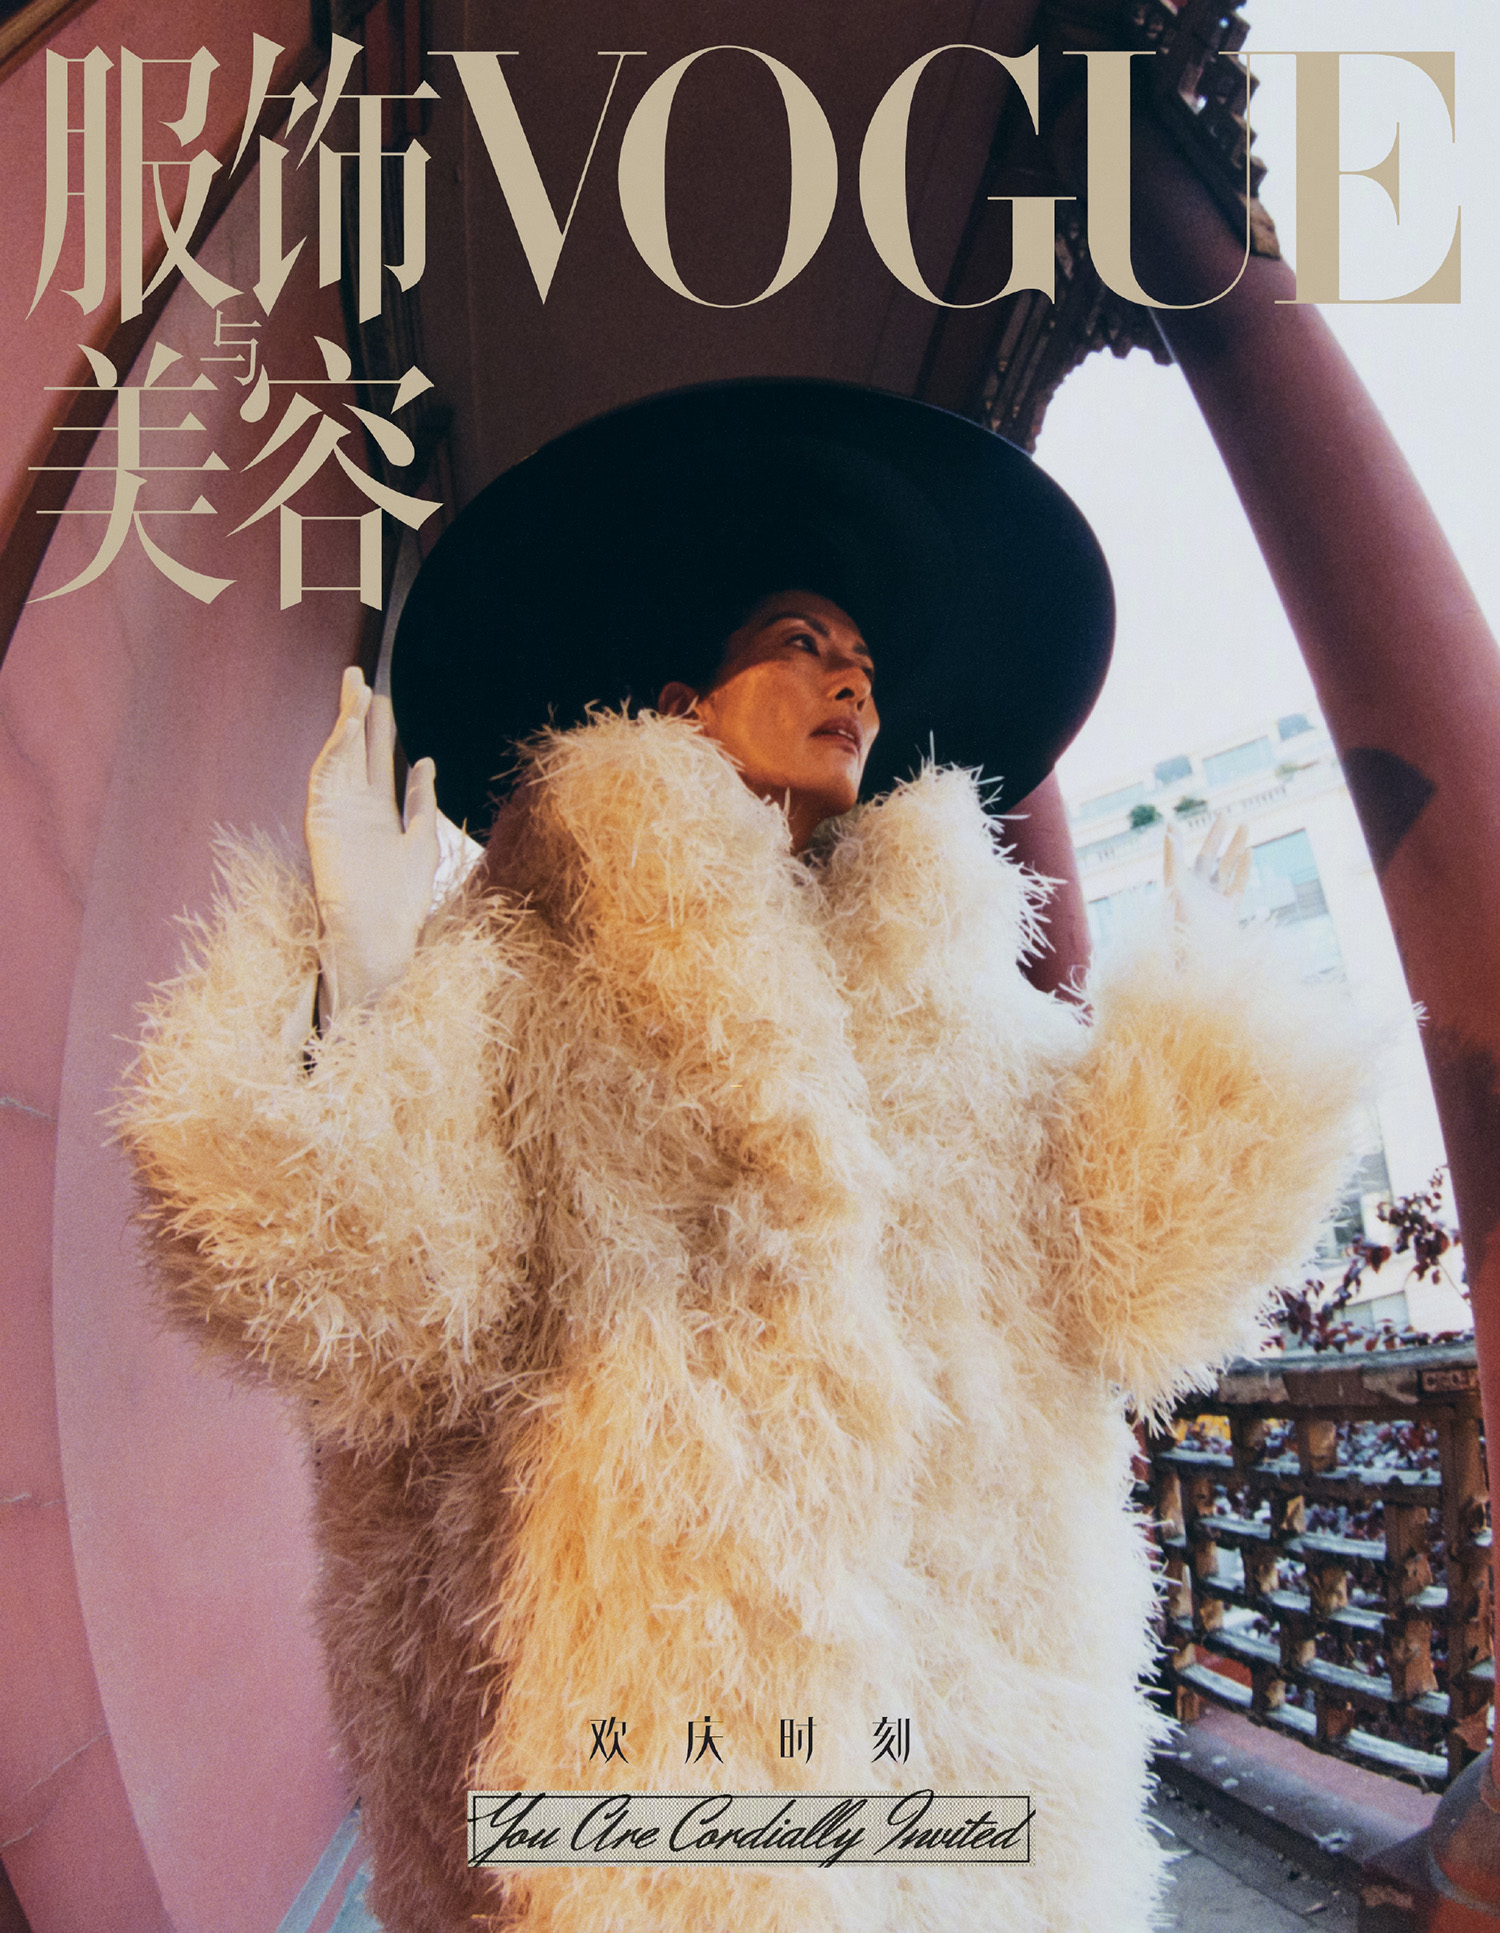 Vogue China December 2021 covers by Lee Wei Swee